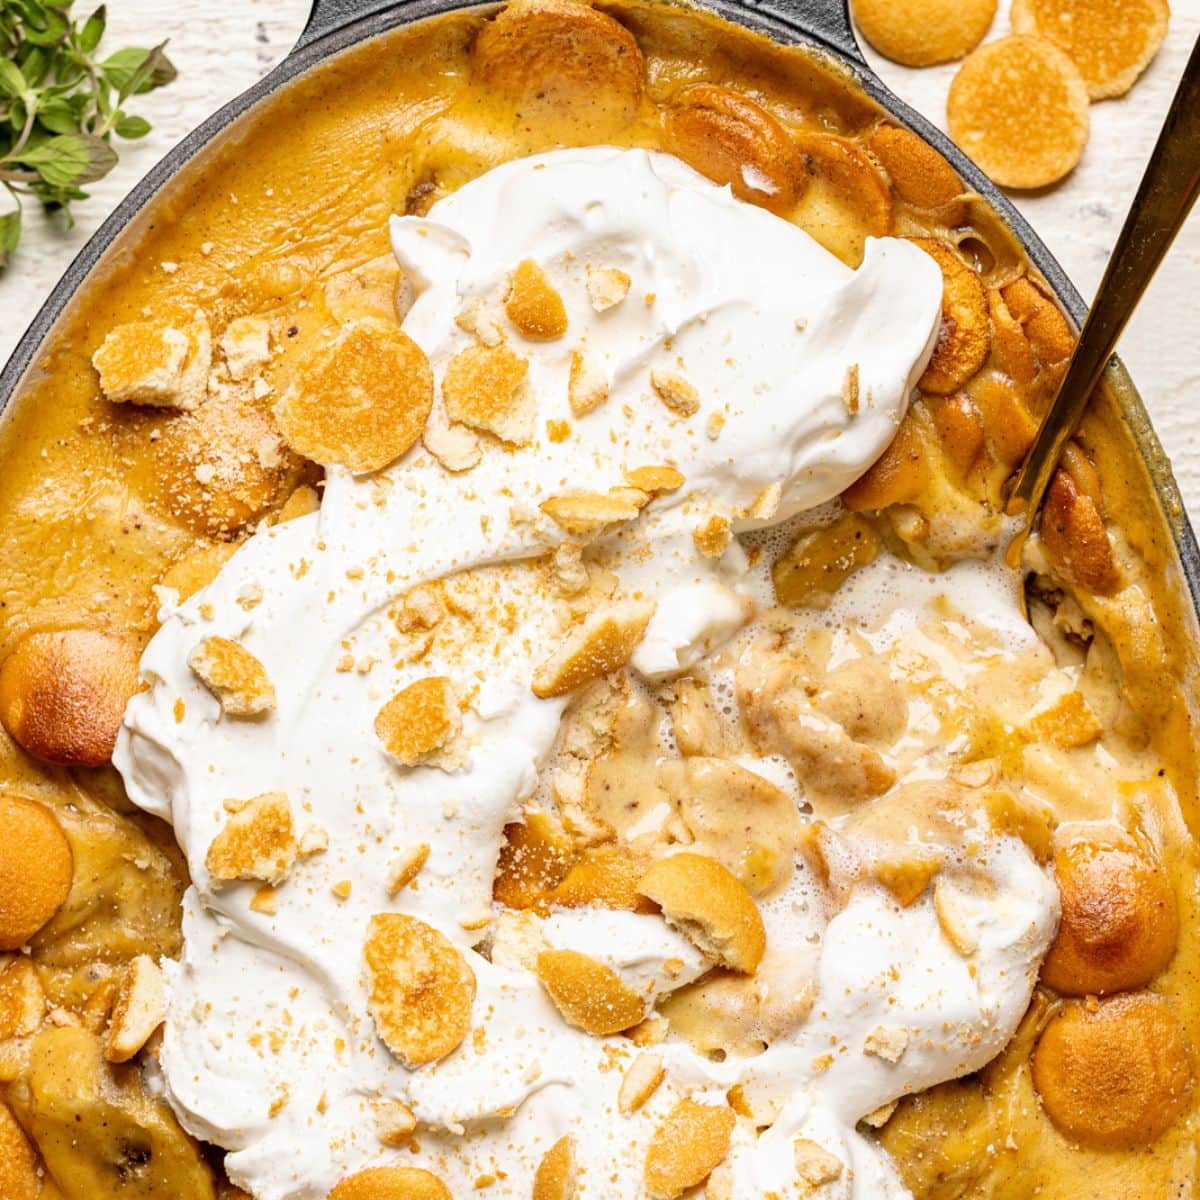 Up close image of baked banana pudding with a spoon.